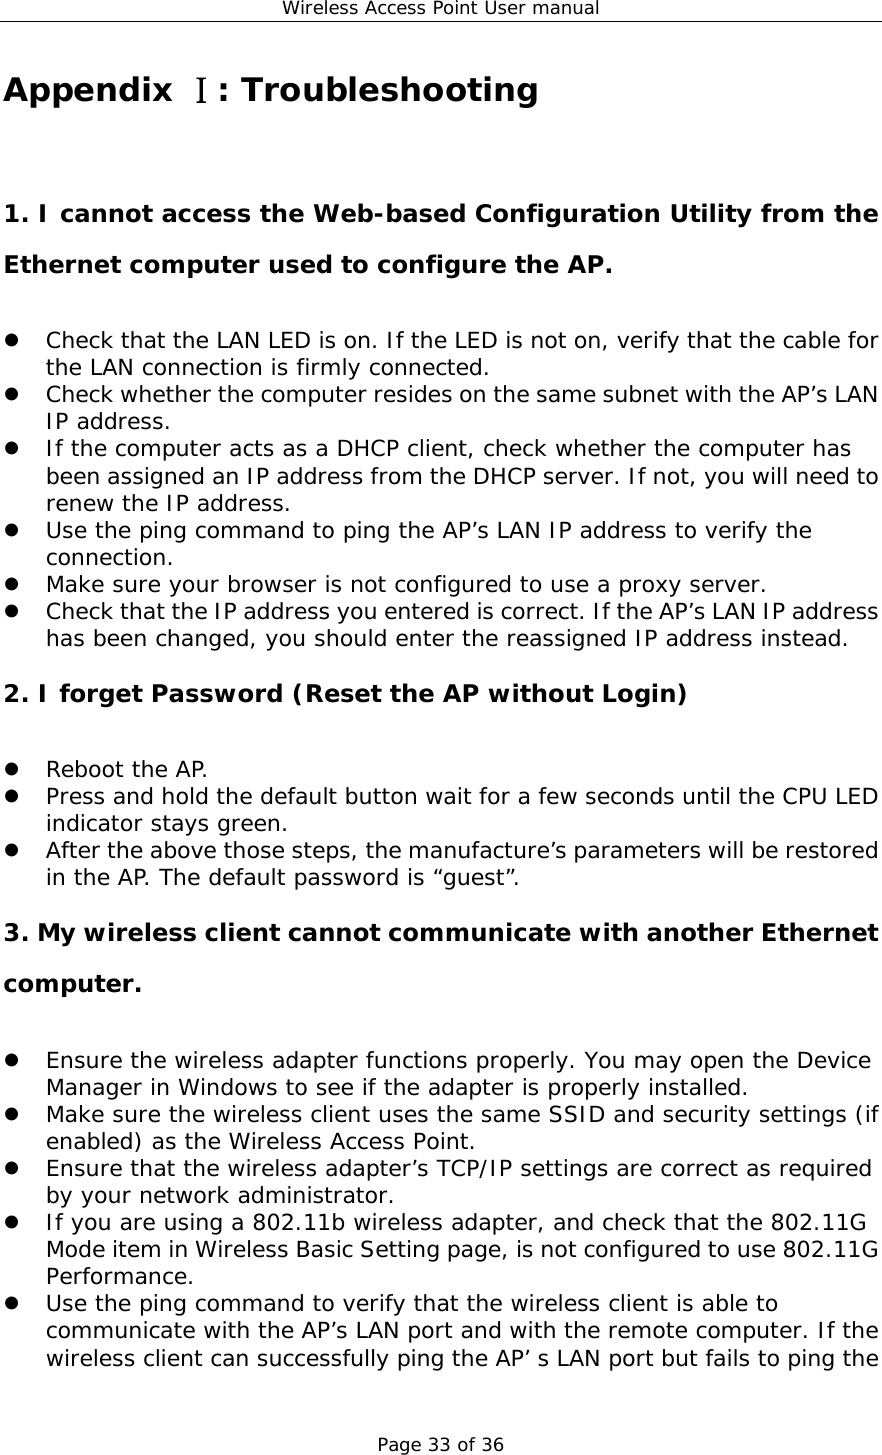 Wireless Access Point User manual Page 33 of 36 Appendix : TroubleshootingⅠ 1. I cannot access the Web-based Configuration Utility from the Ethernet computer used to configure the AP. z Check that the LAN LED is on. If the LED is not on, verify that the cable for the LAN connection is firmly connected. z Check whether the computer resides on the same subnet with the AP’s LAN IP address. z If the computer acts as a DHCP client, check whether the computer has been assigned an IP address from the DHCP server. If not, you will need to renew the IP address.  z Use the ping command to ping the AP’s LAN IP address to verify the connection. z Make sure your browser is not configured to use a proxy server. z Check that the IP address you entered is correct. If the AP’s LAN IP address has been changed, you should enter the reassigned IP address instead. 2. I forget Password (Reset the AP without Login) z Reboot the AP. z Press and hold the default button wait for a few seconds until the CPU LED indicator stays green. z After the above those steps, the manufacture’s parameters will be restored in the AP. The default password is “guest”. 3. My wireless client cannot communicate with another Ethernet computer. z Ensure the wireless adapter functions properly. You may open the Device Manager in Windows to see if the adapter is properly installed. z Make sure the wireless client uses the same SSID and security settings (if enabled) as the Wireless Access Point. z Ensure that the wireless adapter’s TCP/IP settings are correct as required by your network administrator. z If you are using a 802.11b wireless adapter, and check that the 802.11G Mode item in Wireless Basic Setting page, is not configured to use 802.11G Performance. z Use the ping command to verify that the wireless client is able to communicate with the AP’s LAN port and with the remote computer. If the wireless client can successfully ping the AP’ s LAN port but fails to ping the 